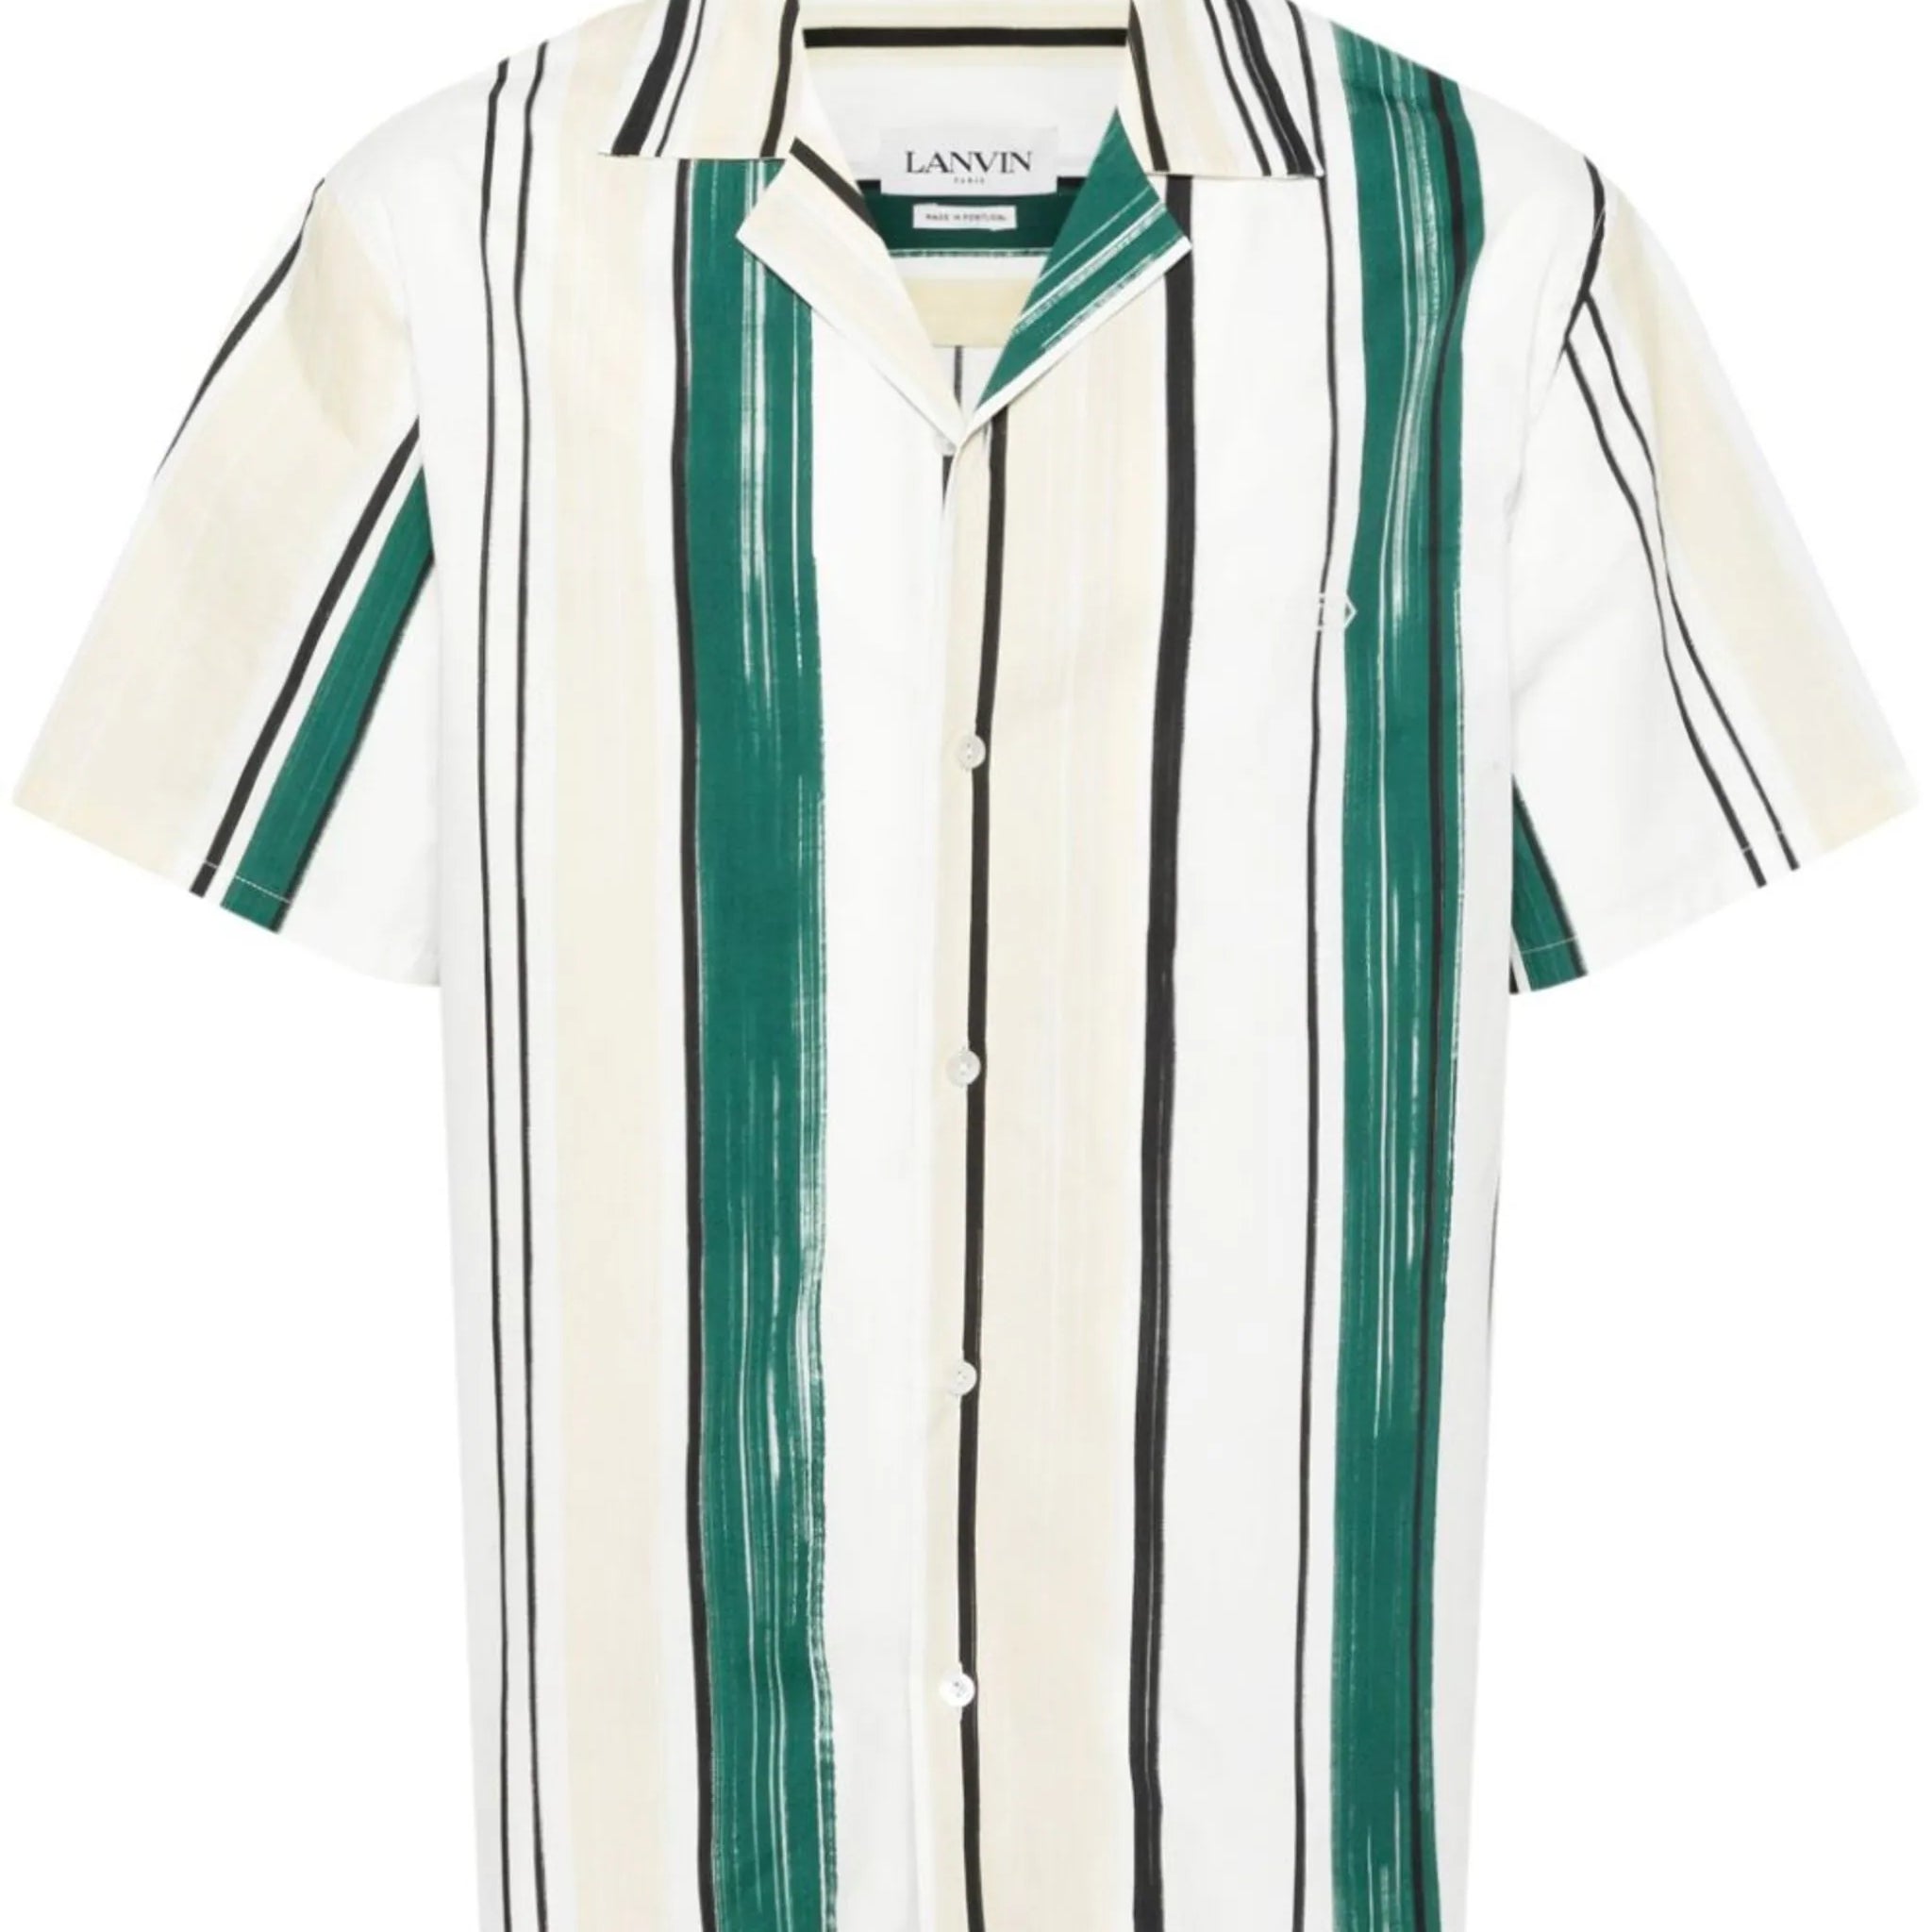 EMBROIDERED-LOGO STRIPED SHIRT